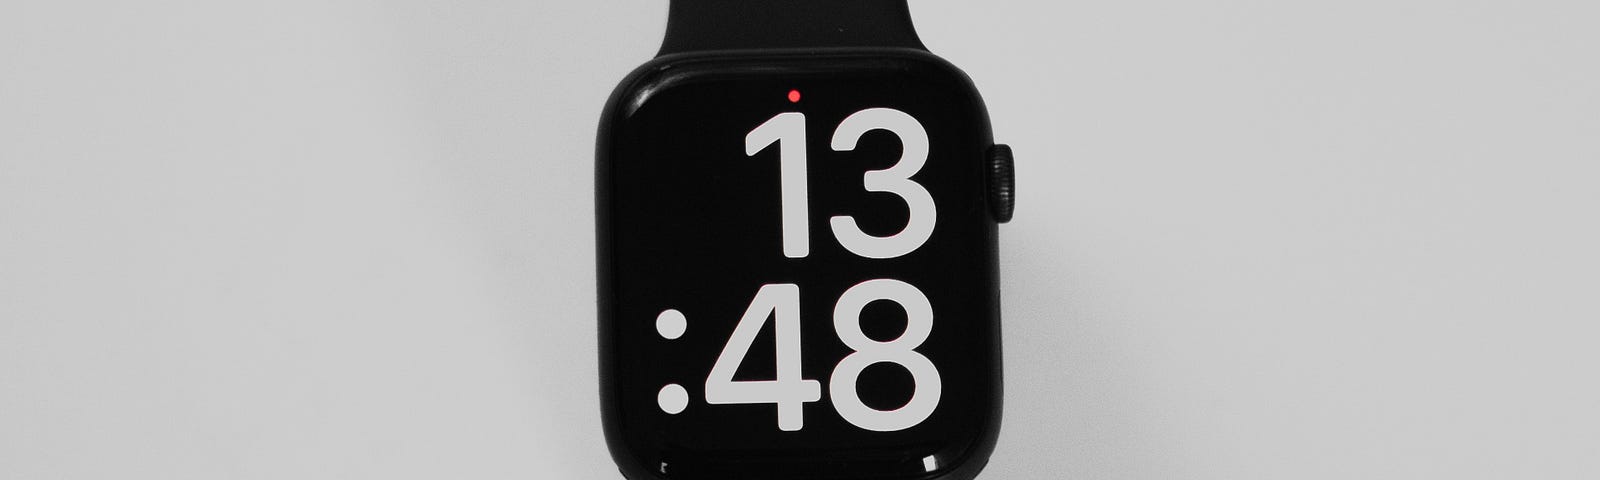 Apple Watch Series 7 showing time 13:48